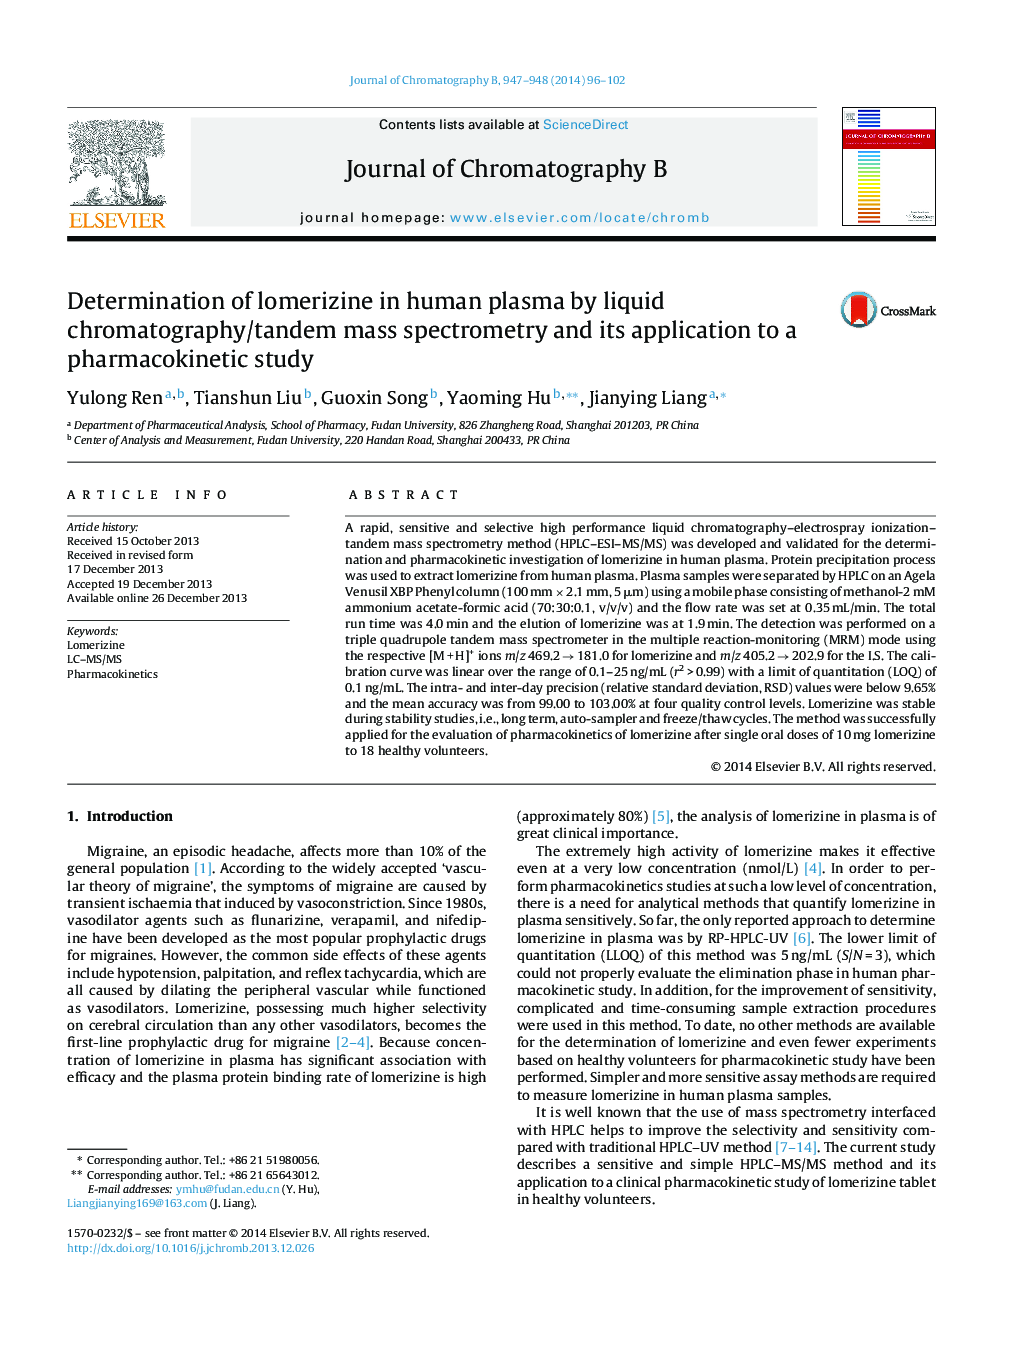 Determination of lomerizine in human plasma by liquid chromatography/tandem mass spectrometry and its application to a pharmacokinetic study